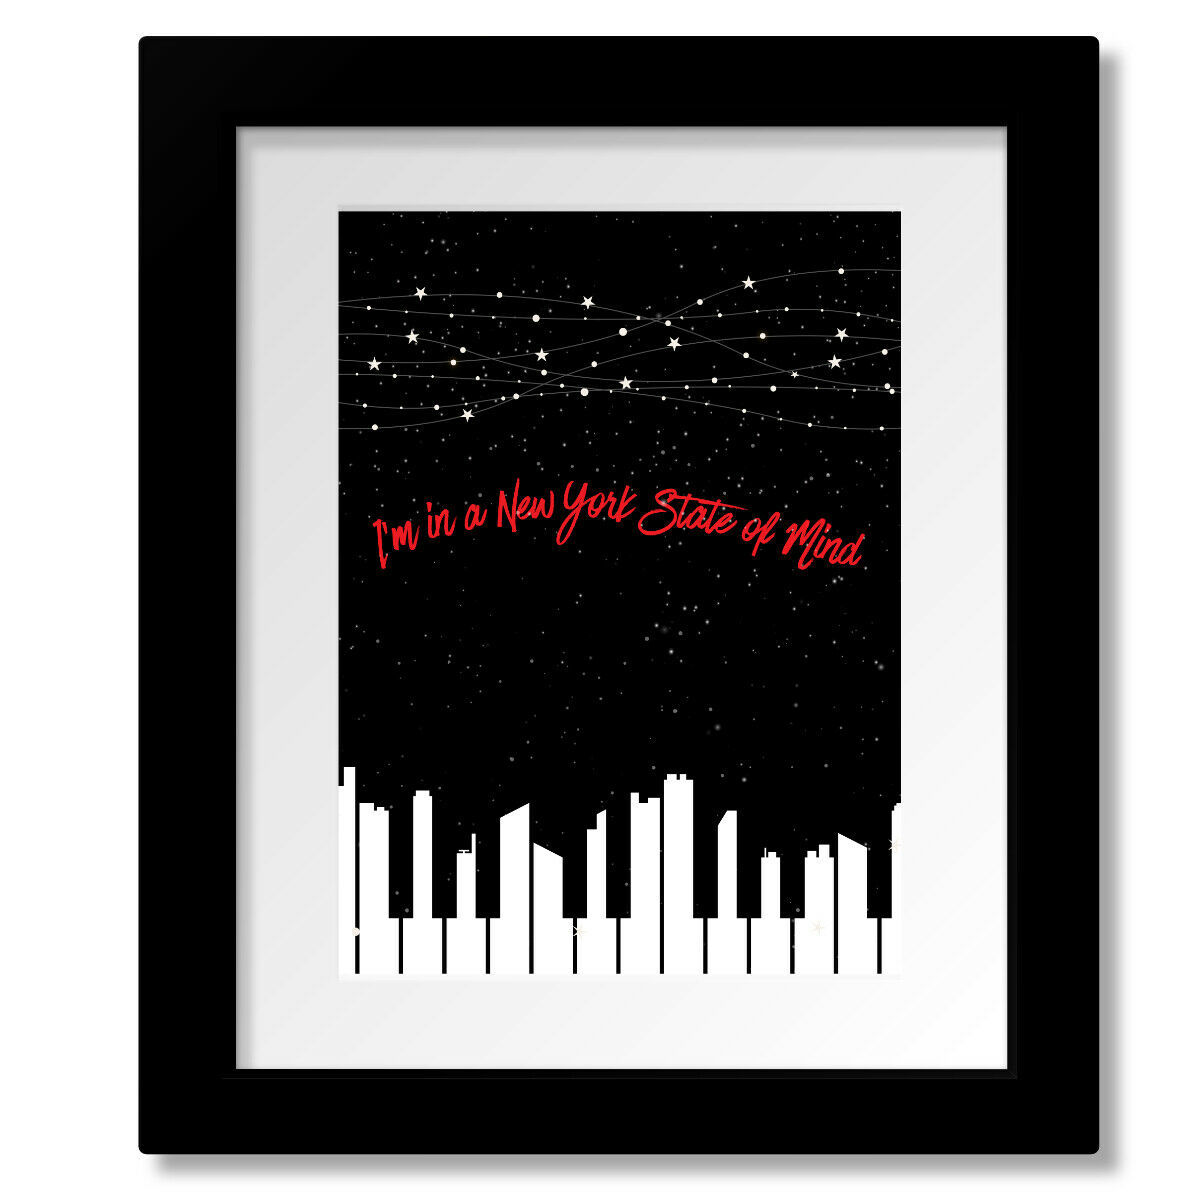 New York State of Mind by Billy Joel - Song Lyric Art Print, Canvas, or Plaque